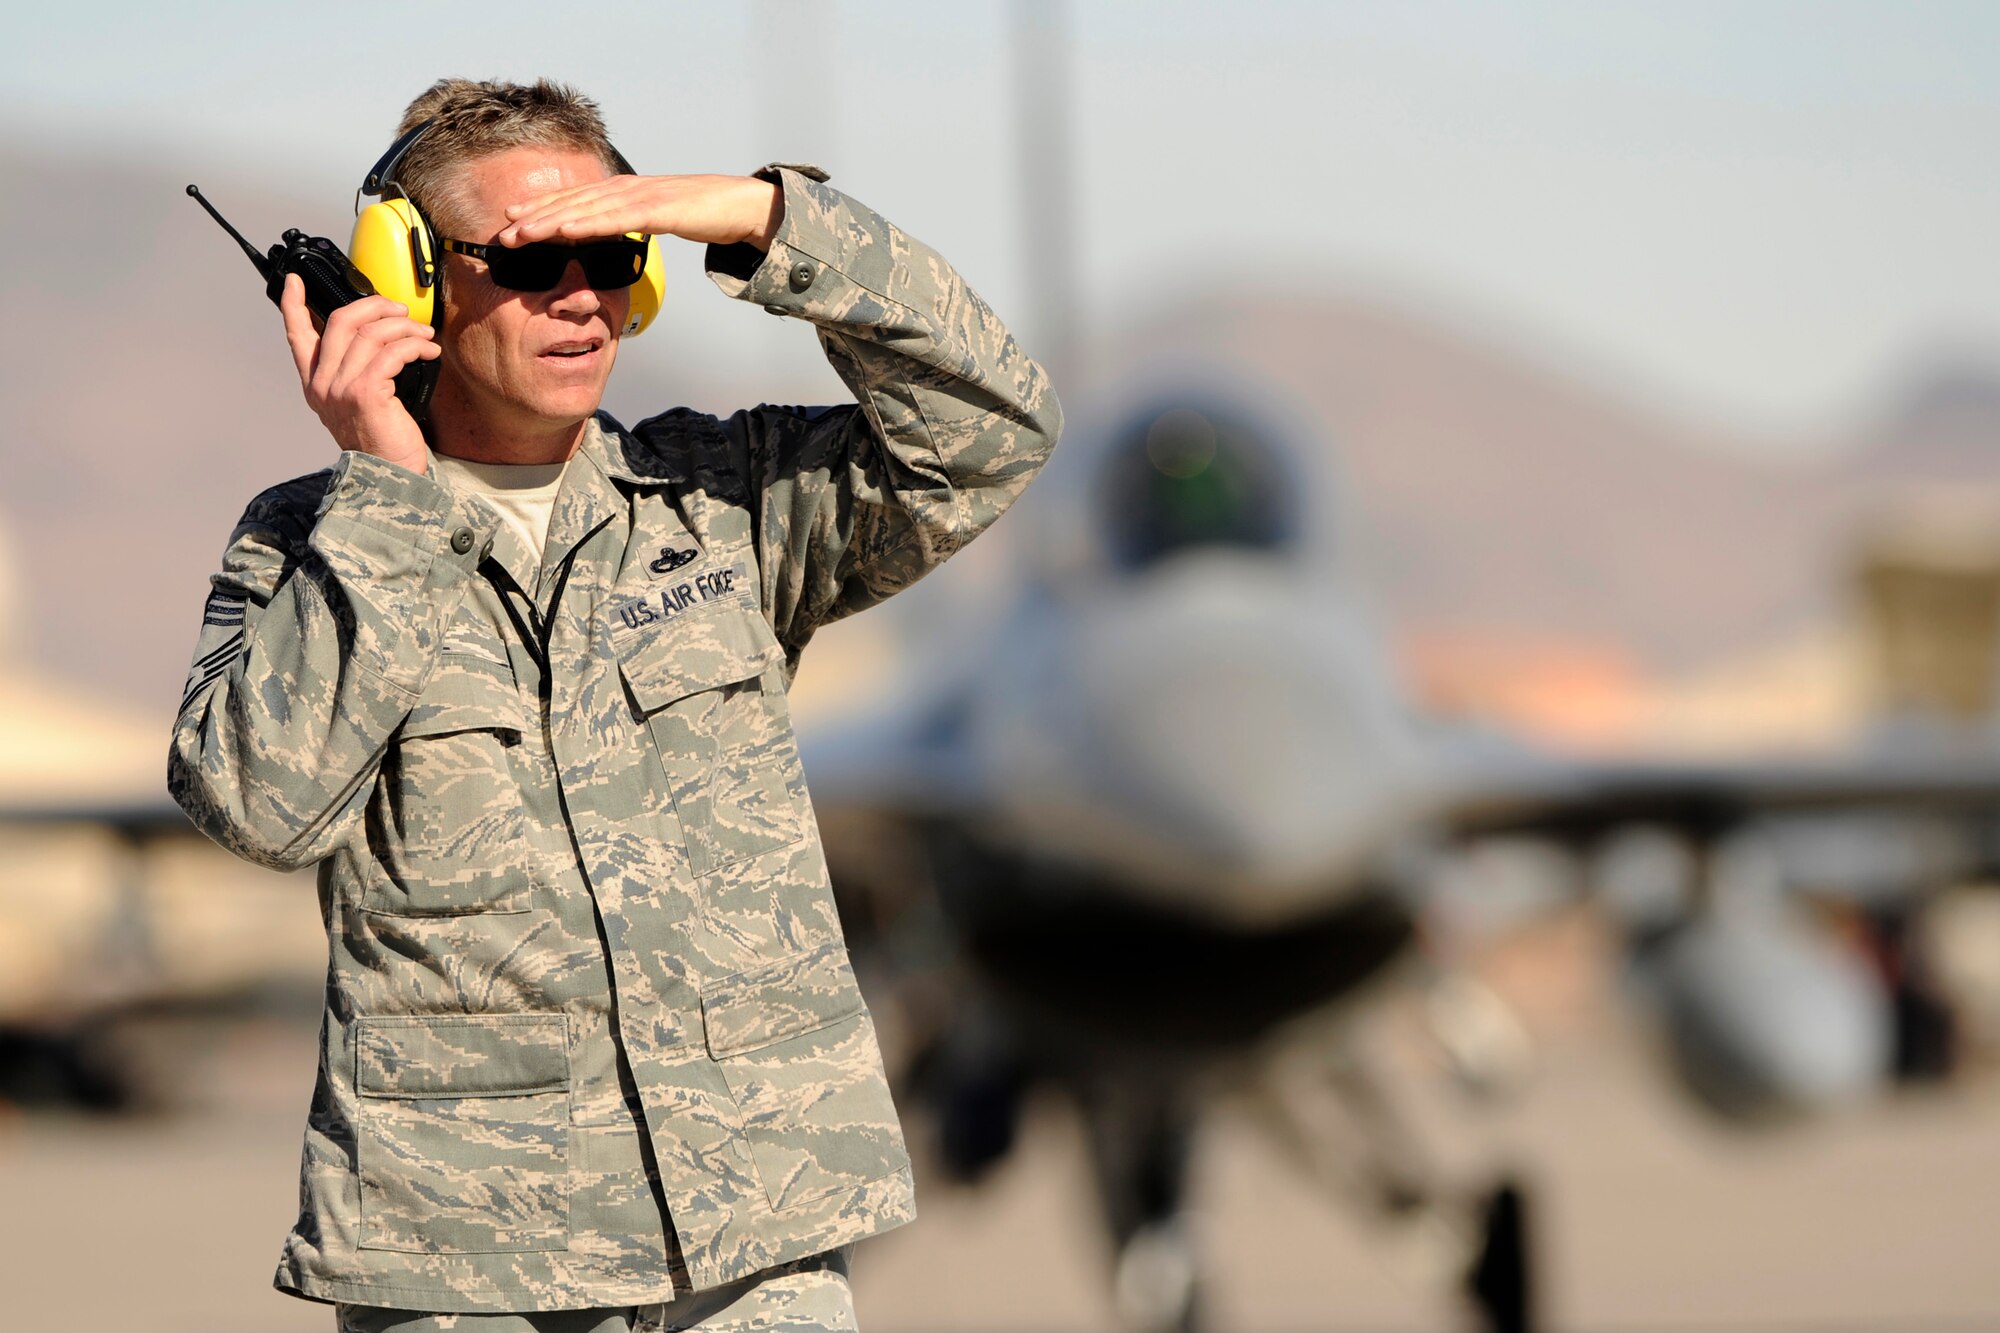 Chief Master Sgt. Robert Thiel, 4th Aircraft Maintenance Unit superintendent, leads the maintenance unit to support the flying mission at Red Flag 12-2 Jan. 23-Feb. 3 at Nellis Air Force Base, Nev. (USAF photo by MSgt Ben Bloker)